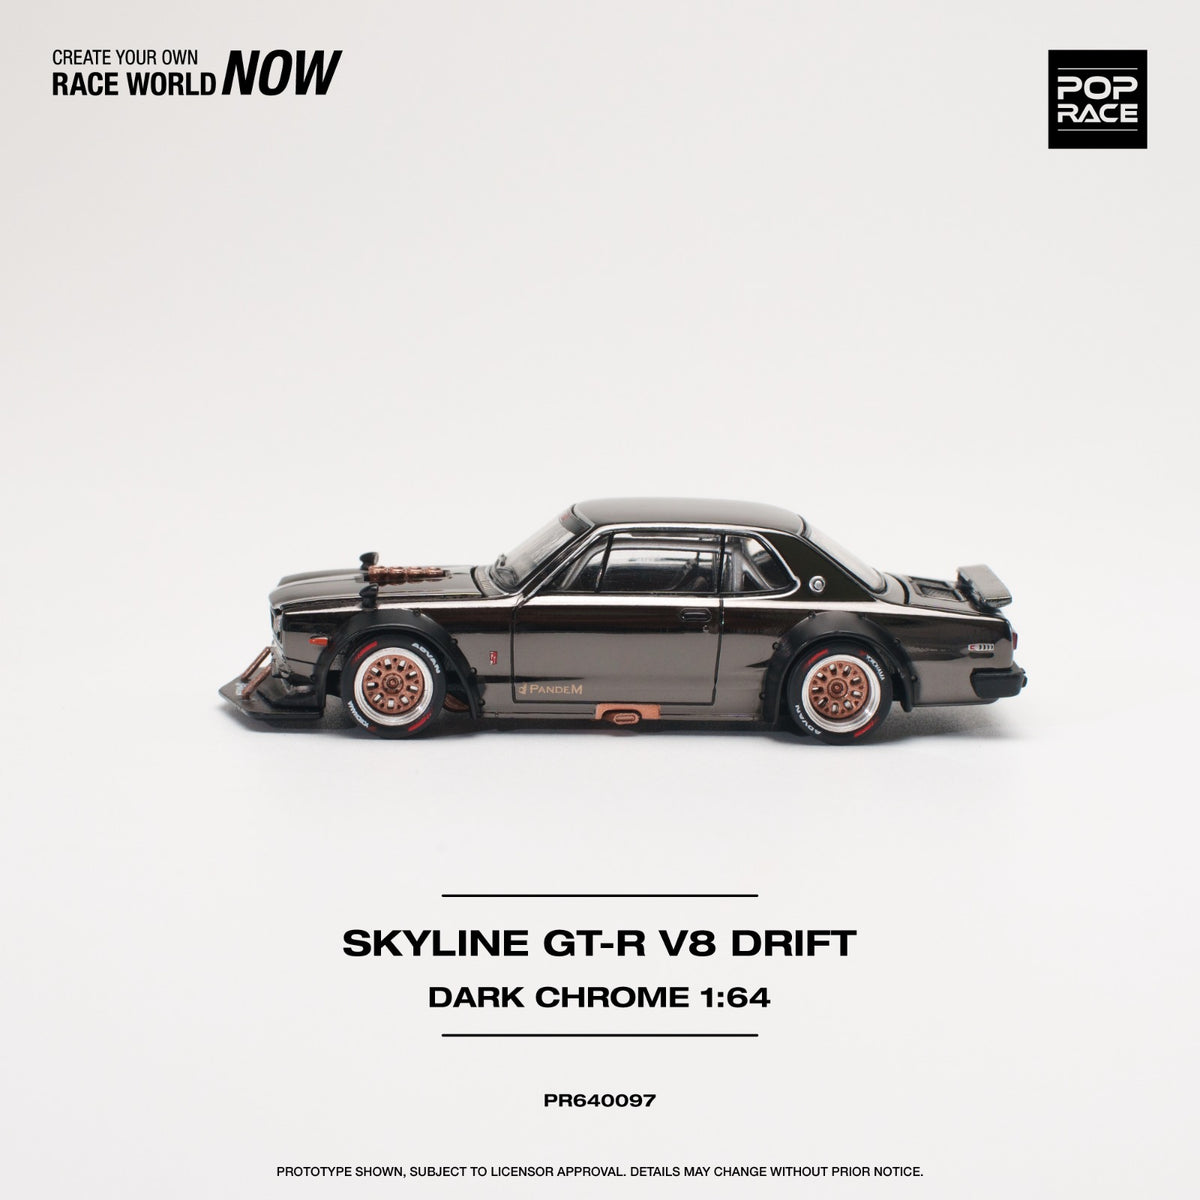 PREORDER POPRACE 1/64 SKYLINE GT-R V8 DRIFT (HAKOSUKA) DARK CHROME PR640097  (Approx. Release Date: Q3 2024 and subject to the manufacturer's final 